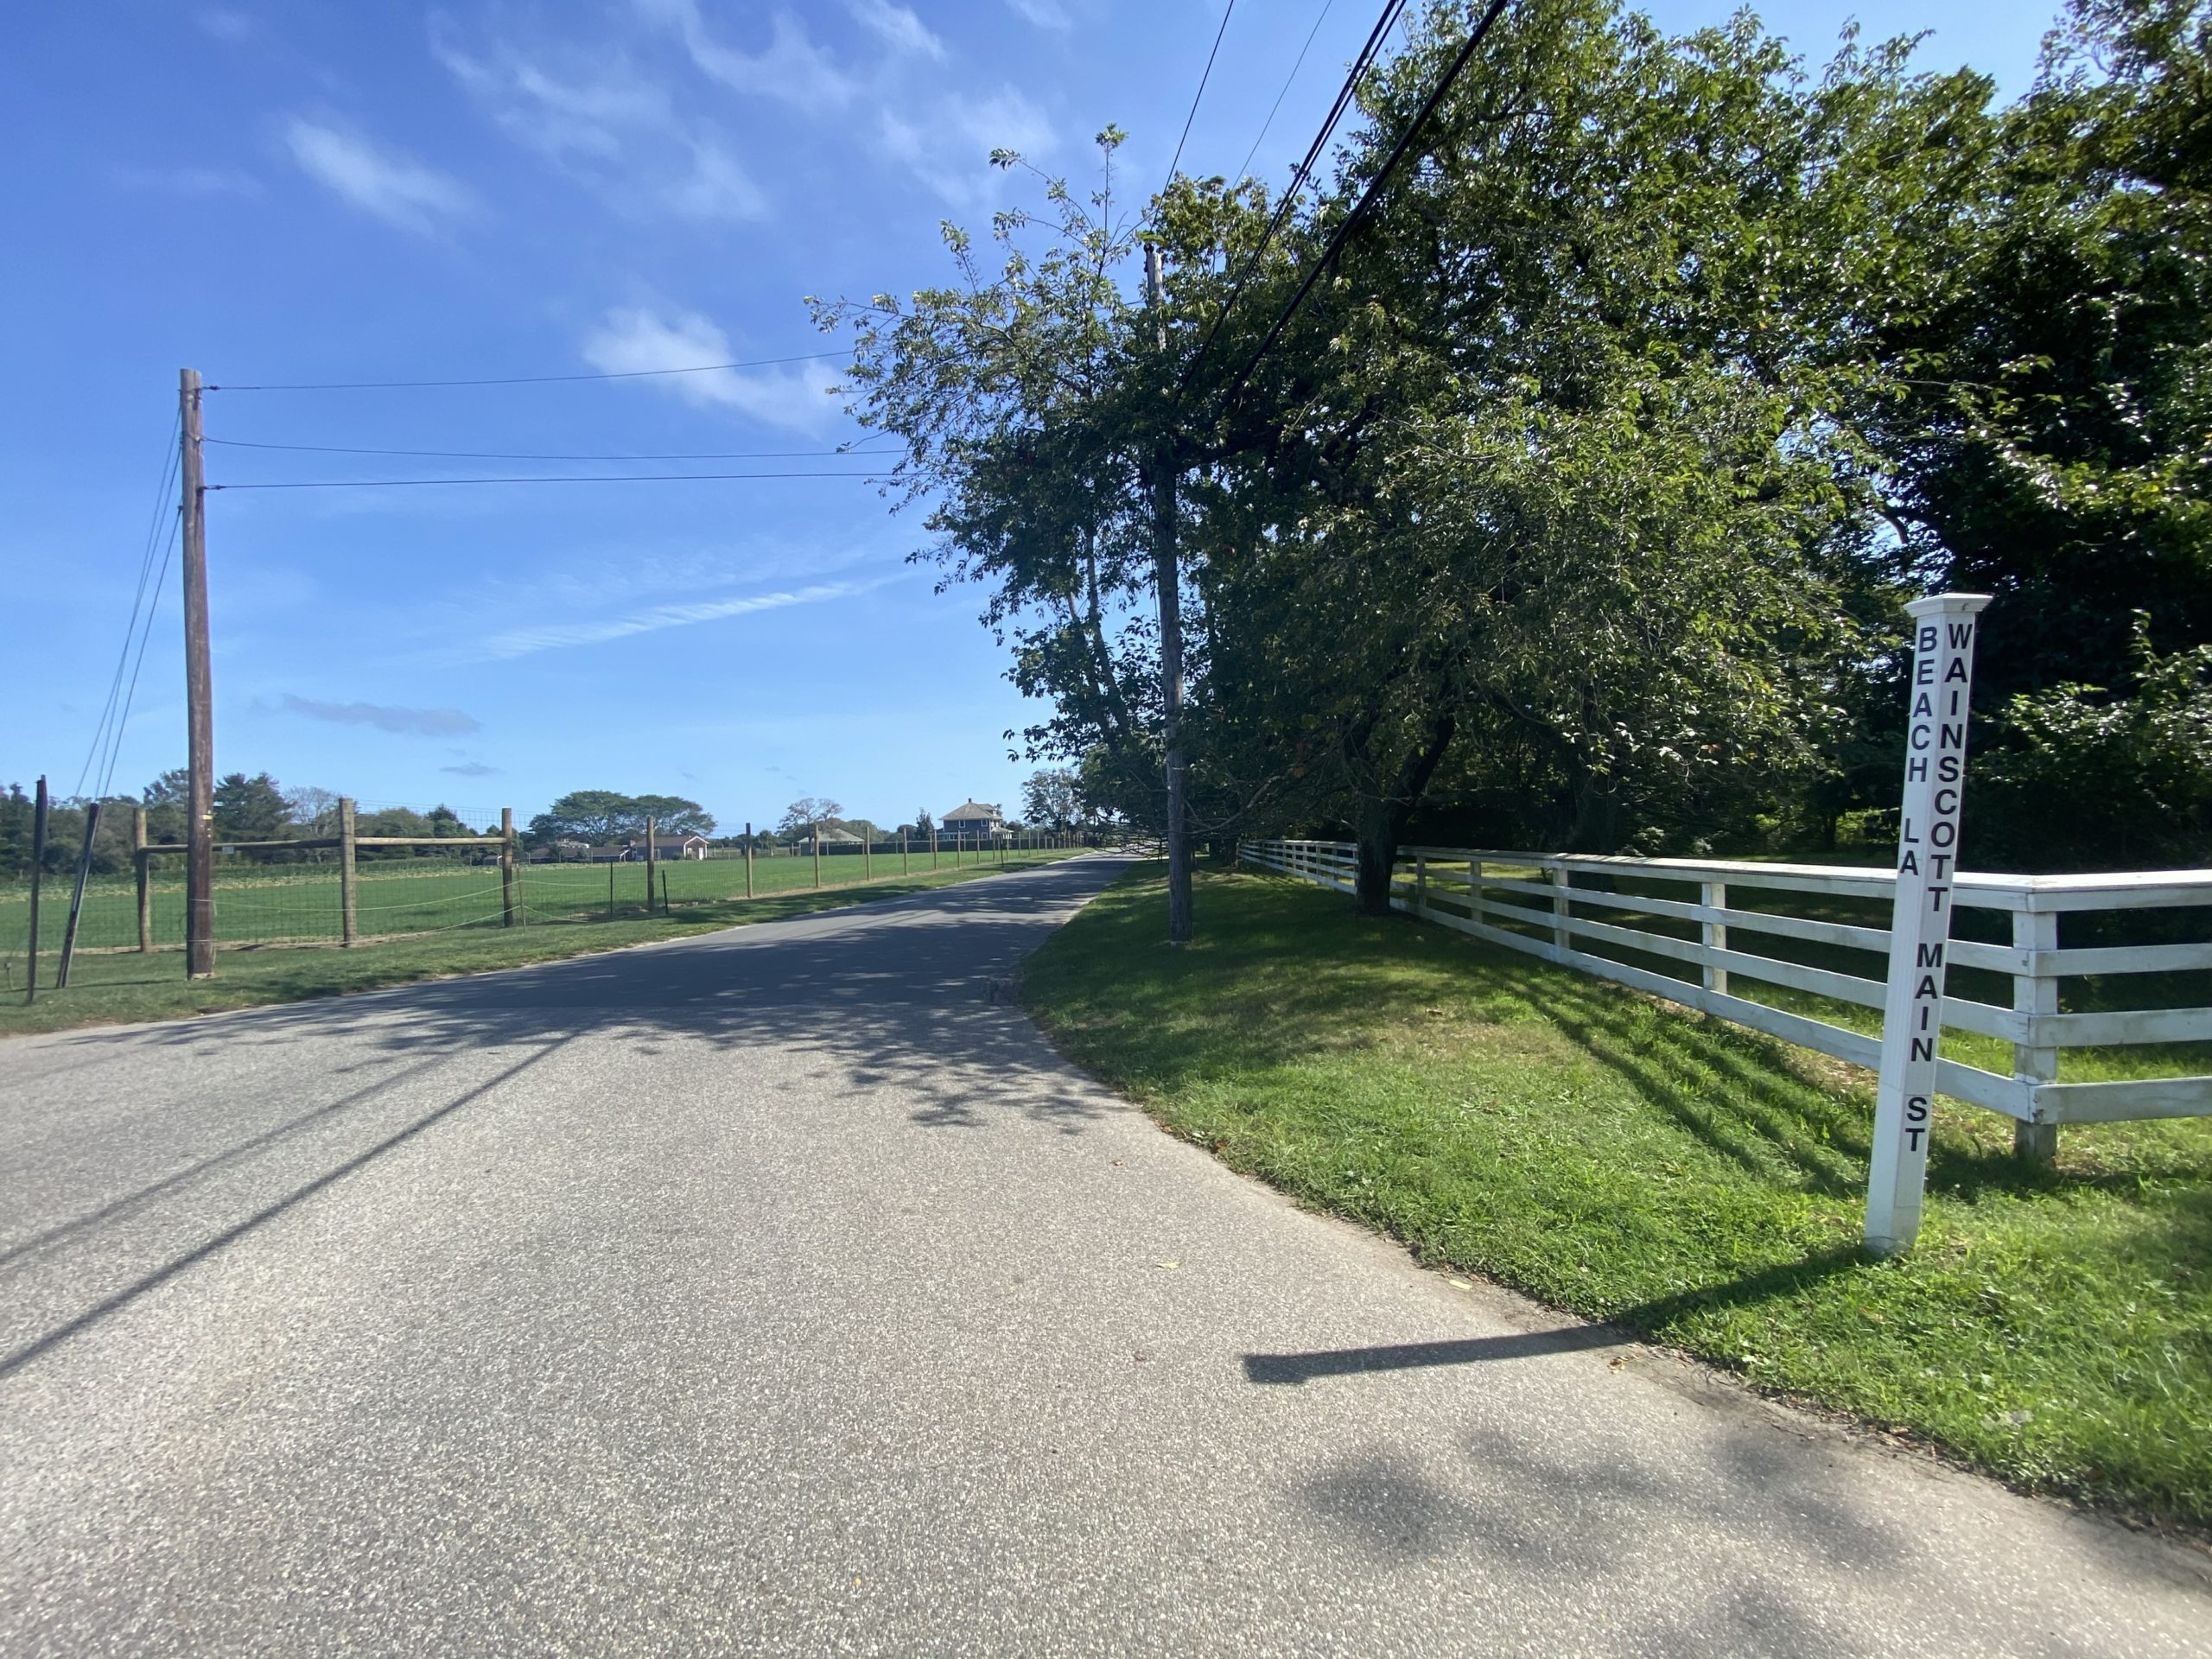 The wind farm developer Orsted has offered East Hampton Town $29 million to land the South Fork Wind Farm power cable at Beach Lane in Wainscott. 